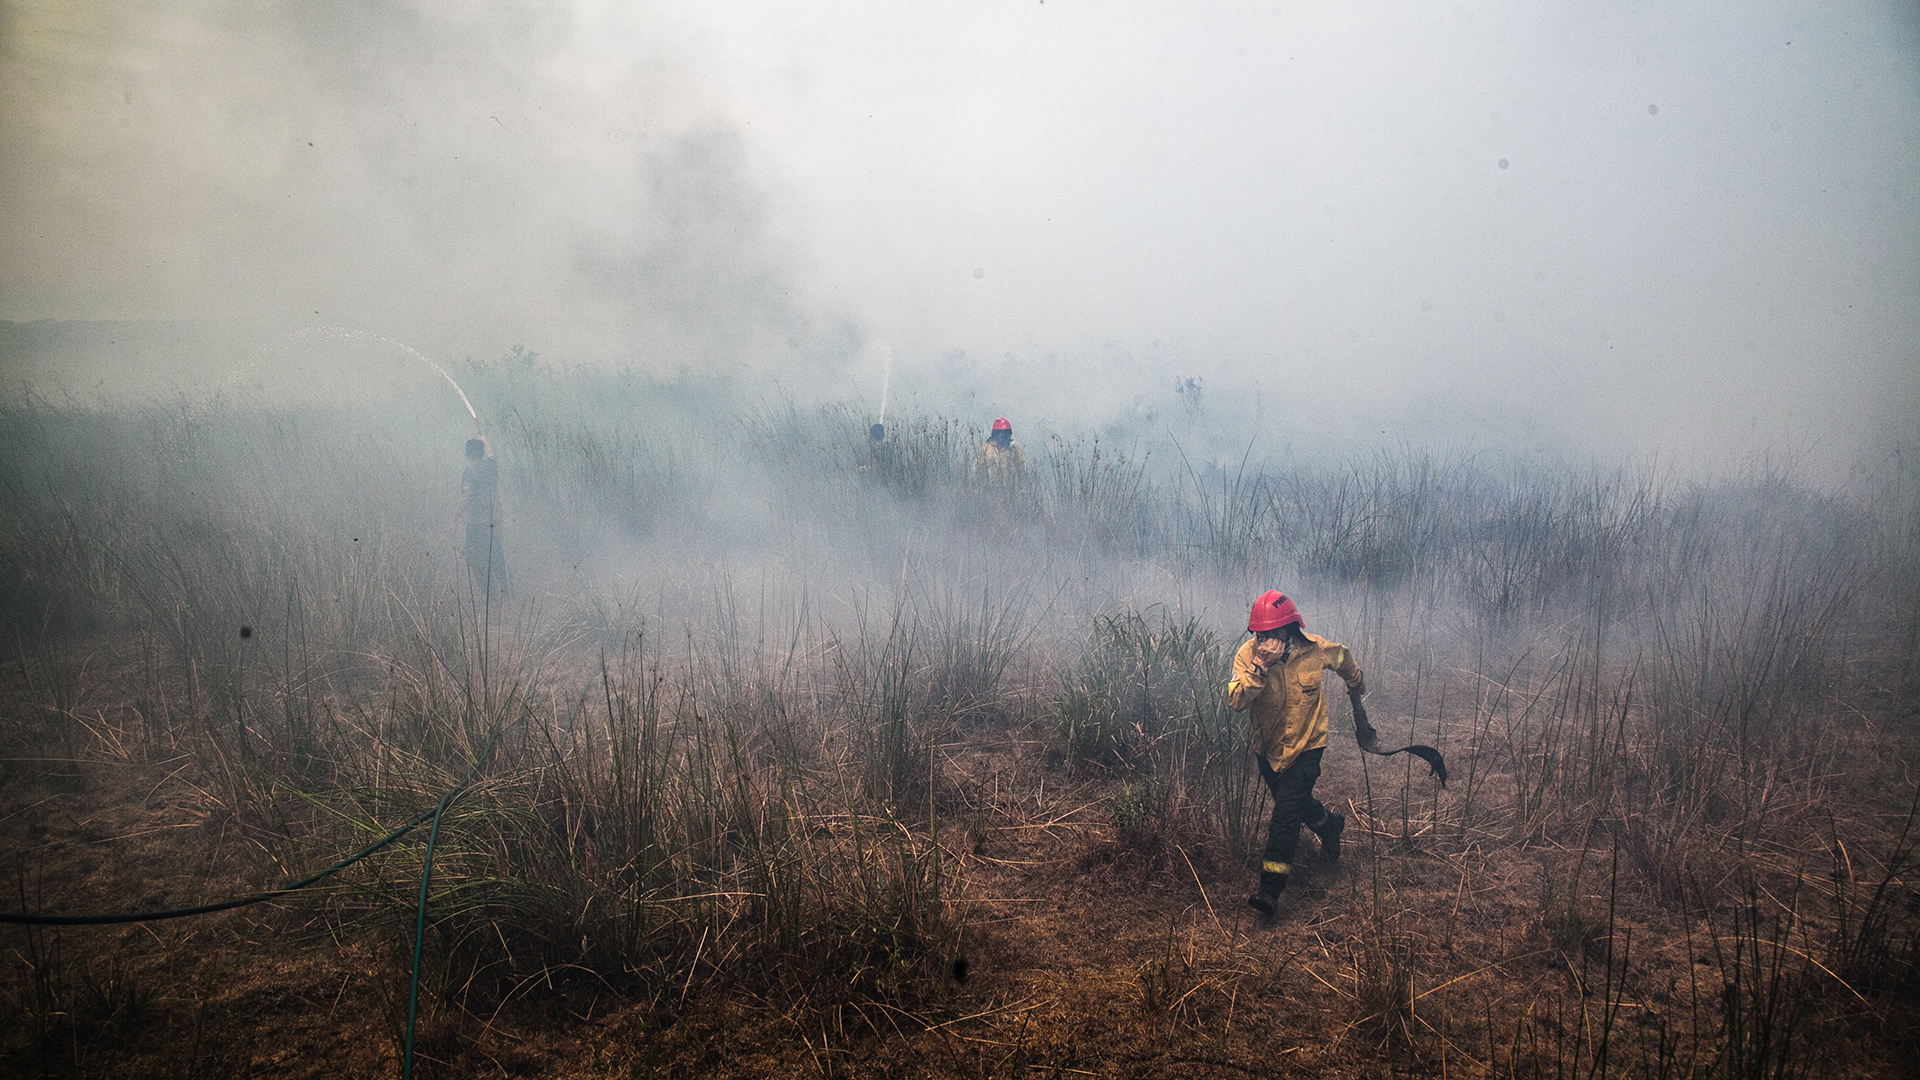 In February, wildfires fueled by severe drought consumed forests, grasslands and wetlands in northeastern Argentina, burning an estimated 40% of the Ibera National Park.